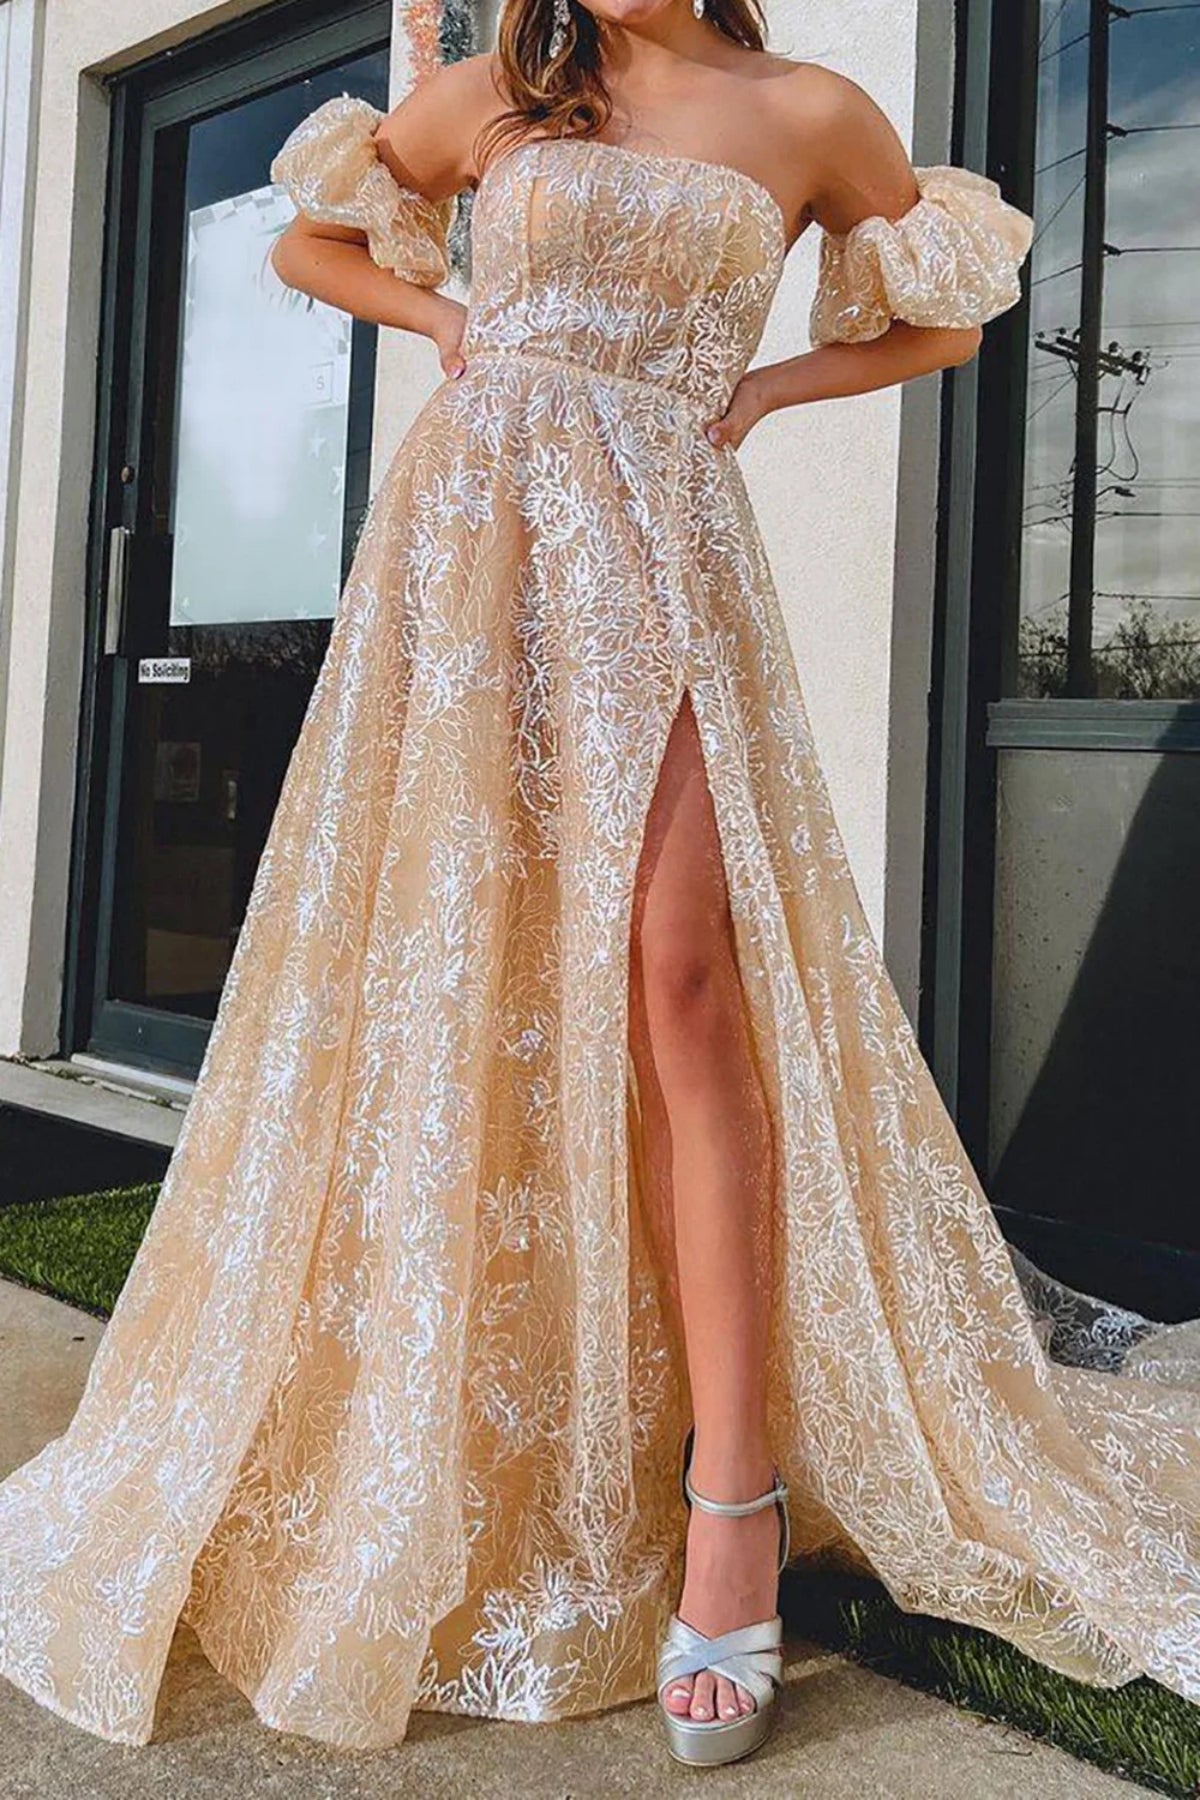 Champagne Strapless Lace Long Prom Dresses with High Slit, Long Champagne Lace Formal Graduation Evening Dresses WT1346